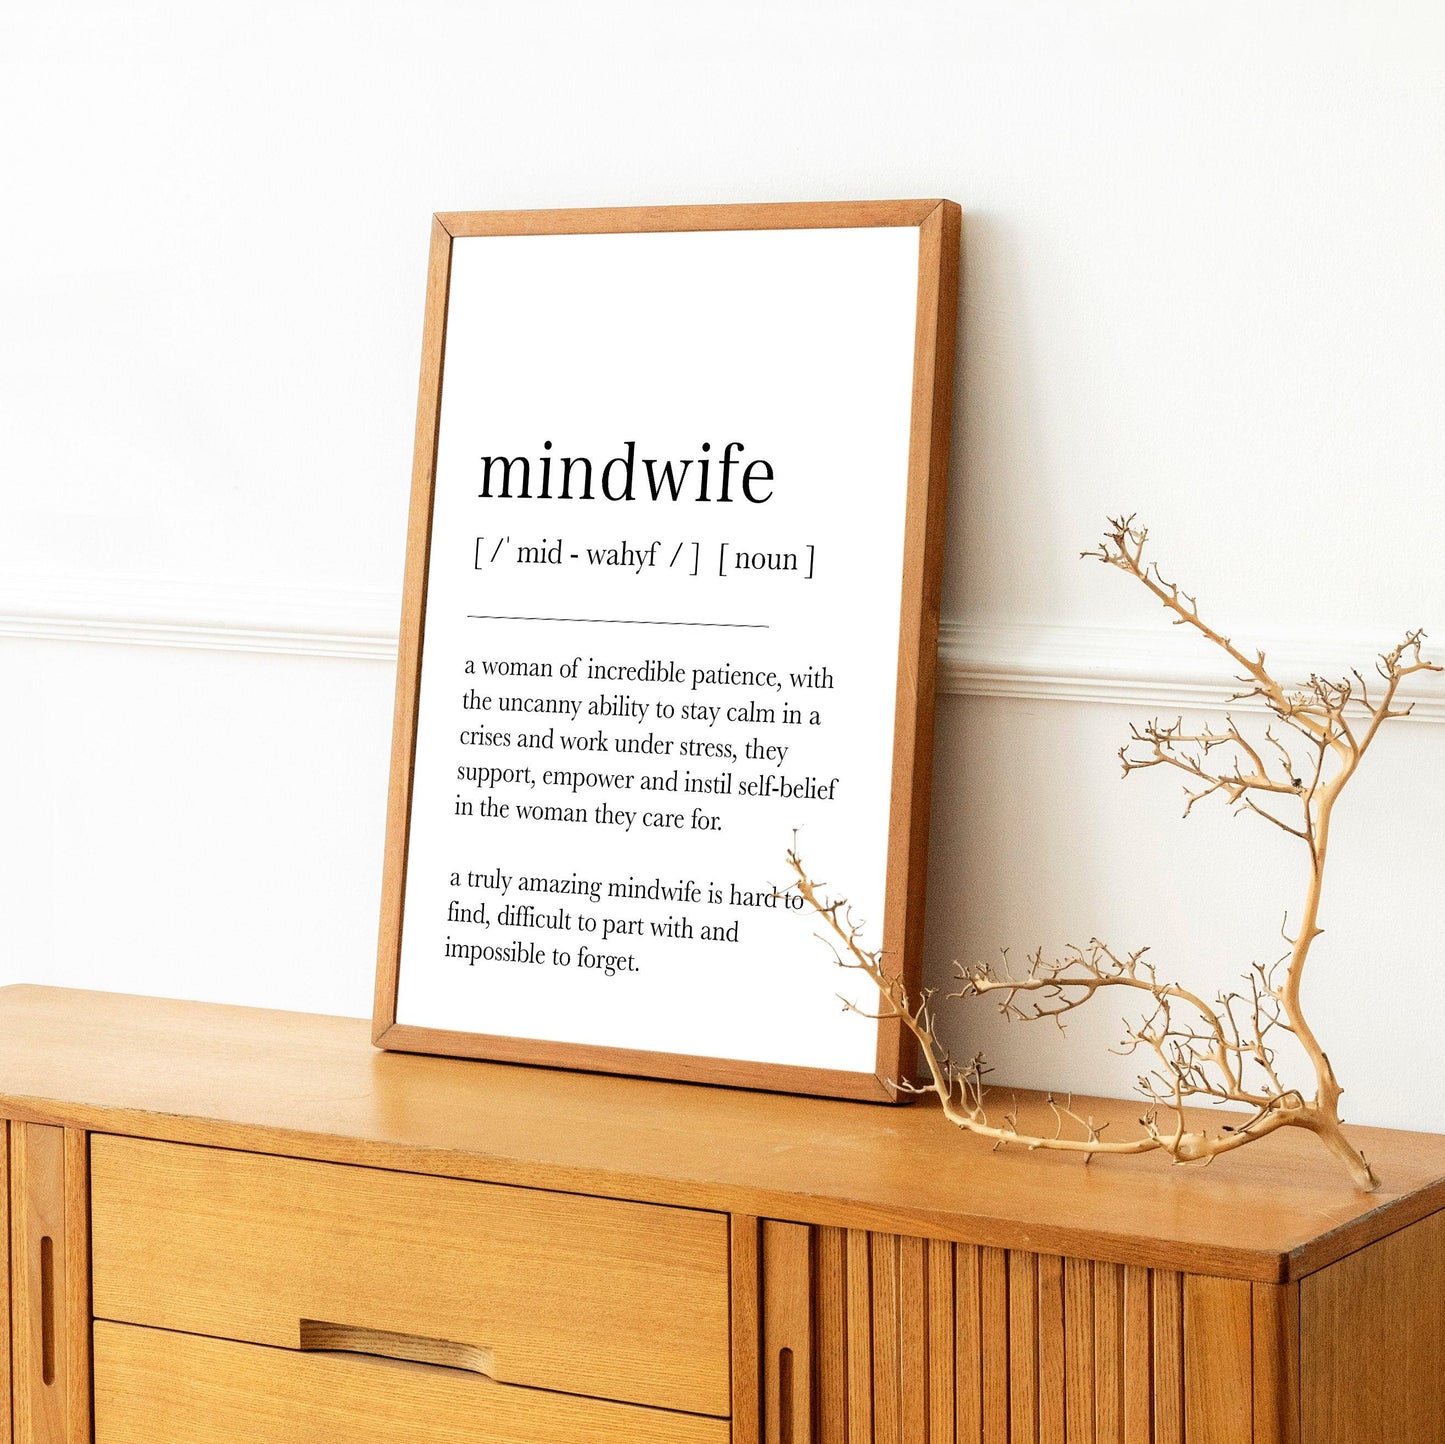 Midwife Definition Print | Midwife Gift | Midwife Thank You Gift | Midwife Quote Print | NHS Midwife Print | Midwife Present | Midwifery